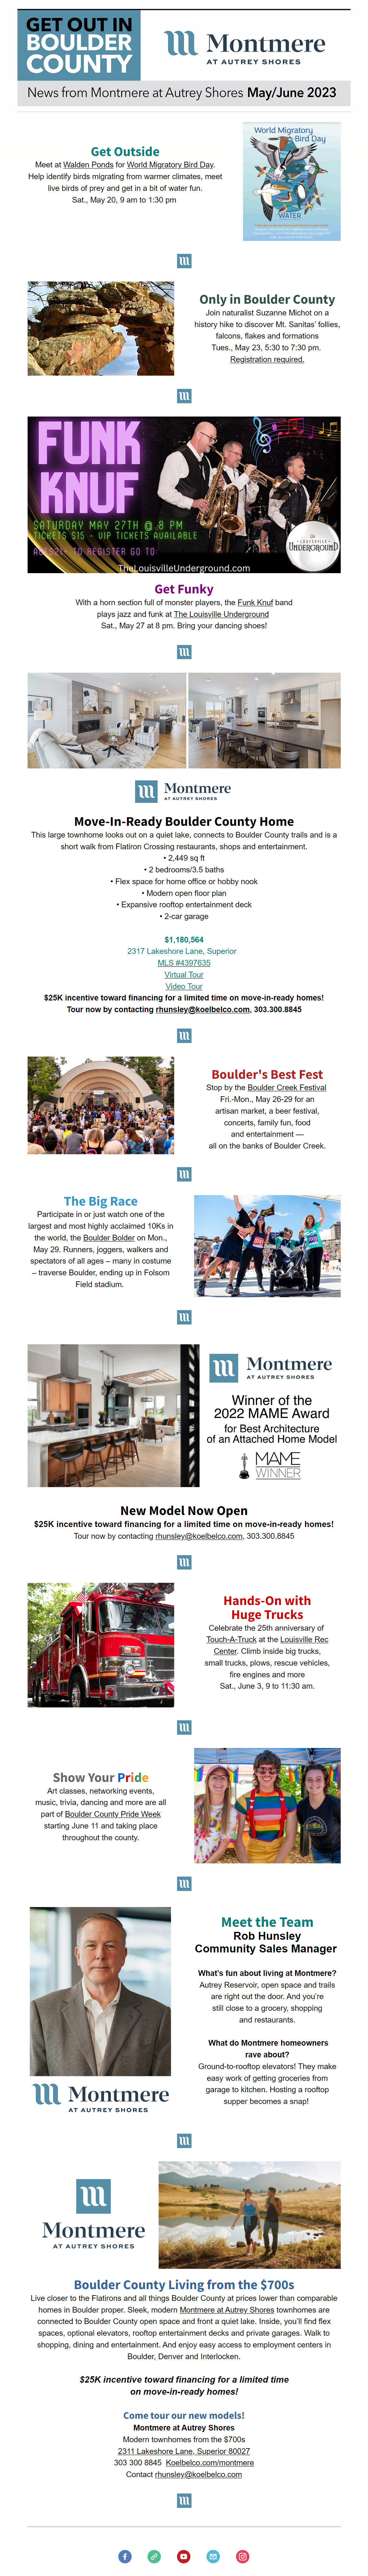 montmere.newsletter.may.june